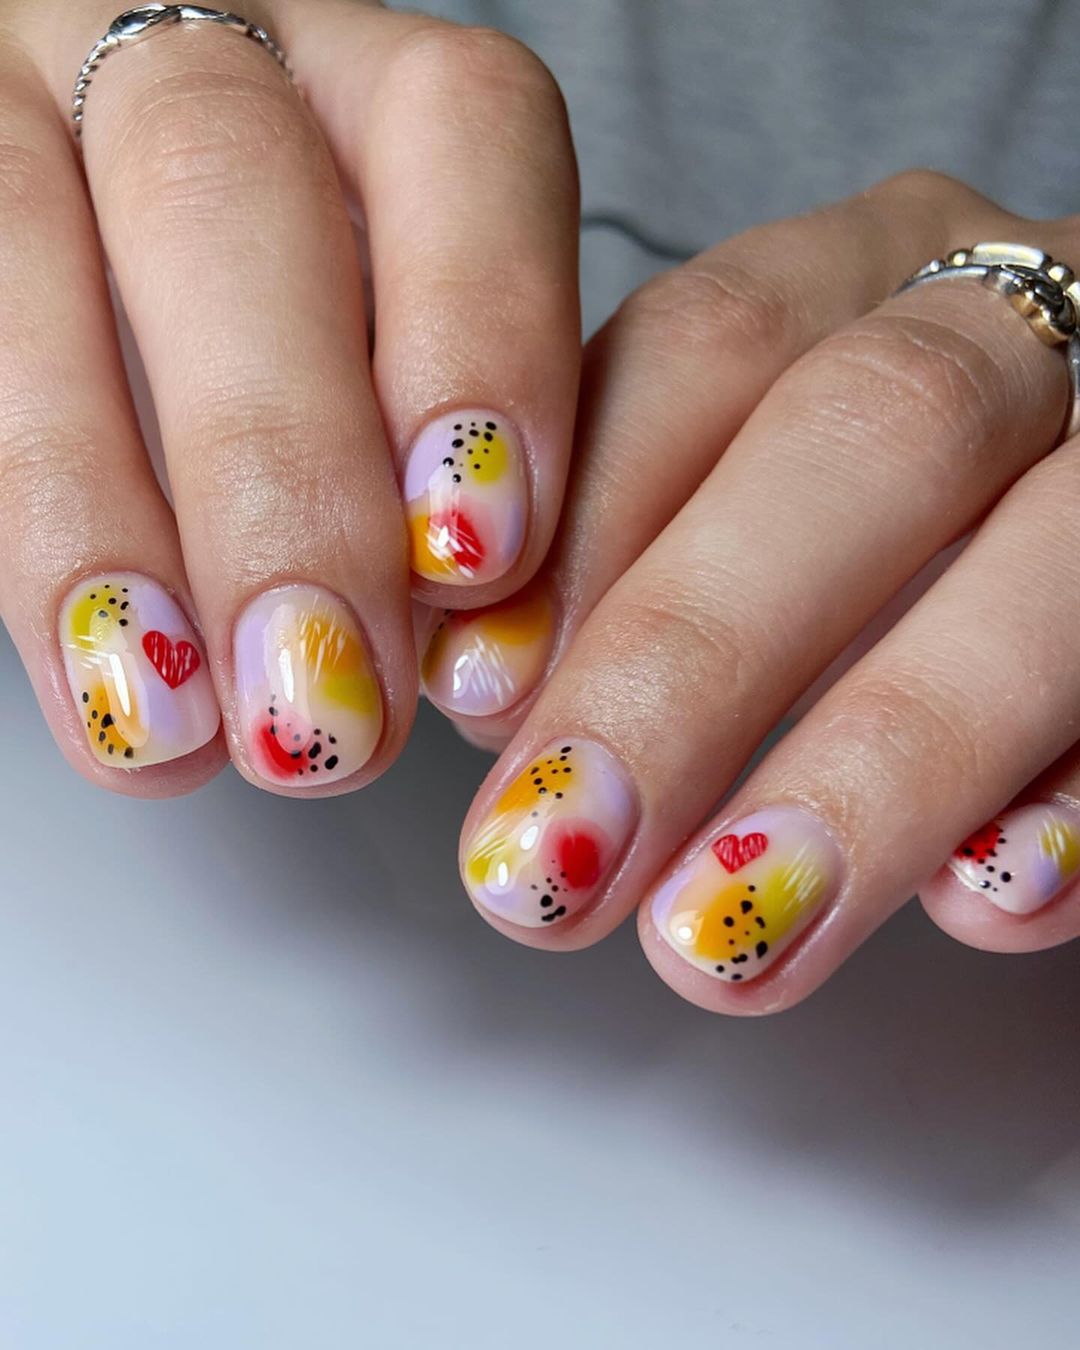 Stay Cool and Chic: Summer Short Acrylic Nail Designs